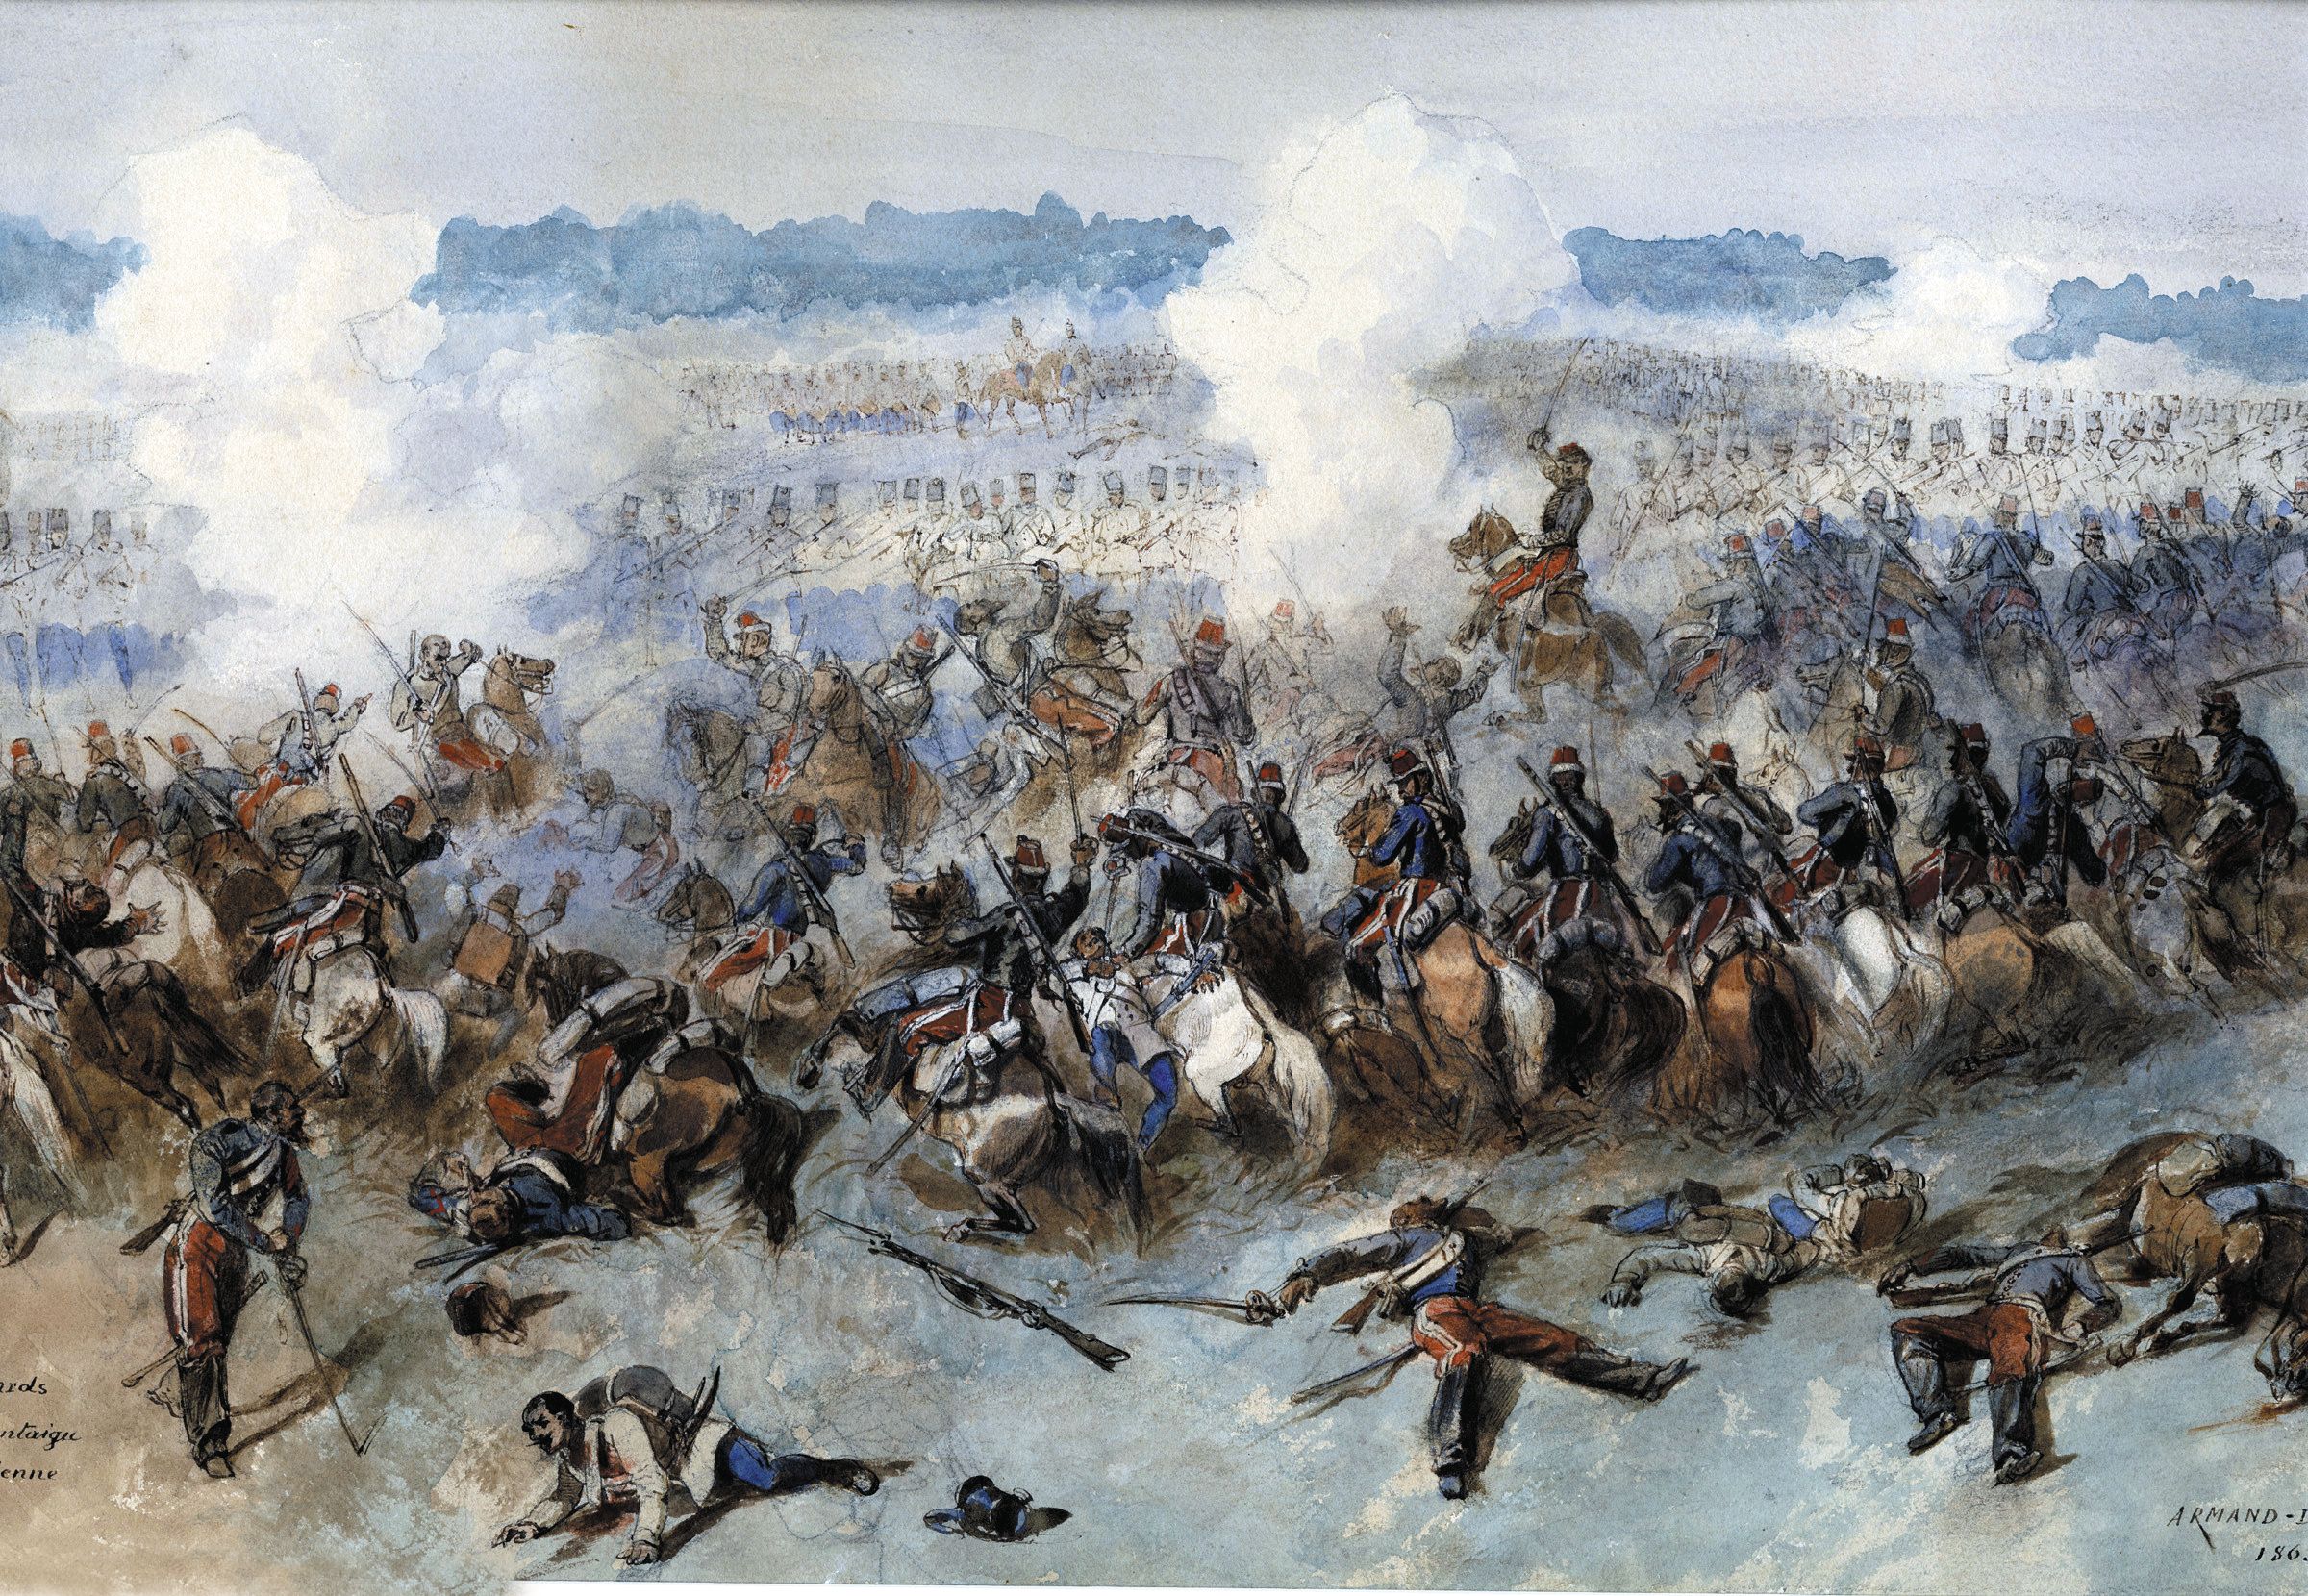 The French 5th Hussars made repeated charges on the Austrian position at Solferino, adding to the fearsome toll of casualties.